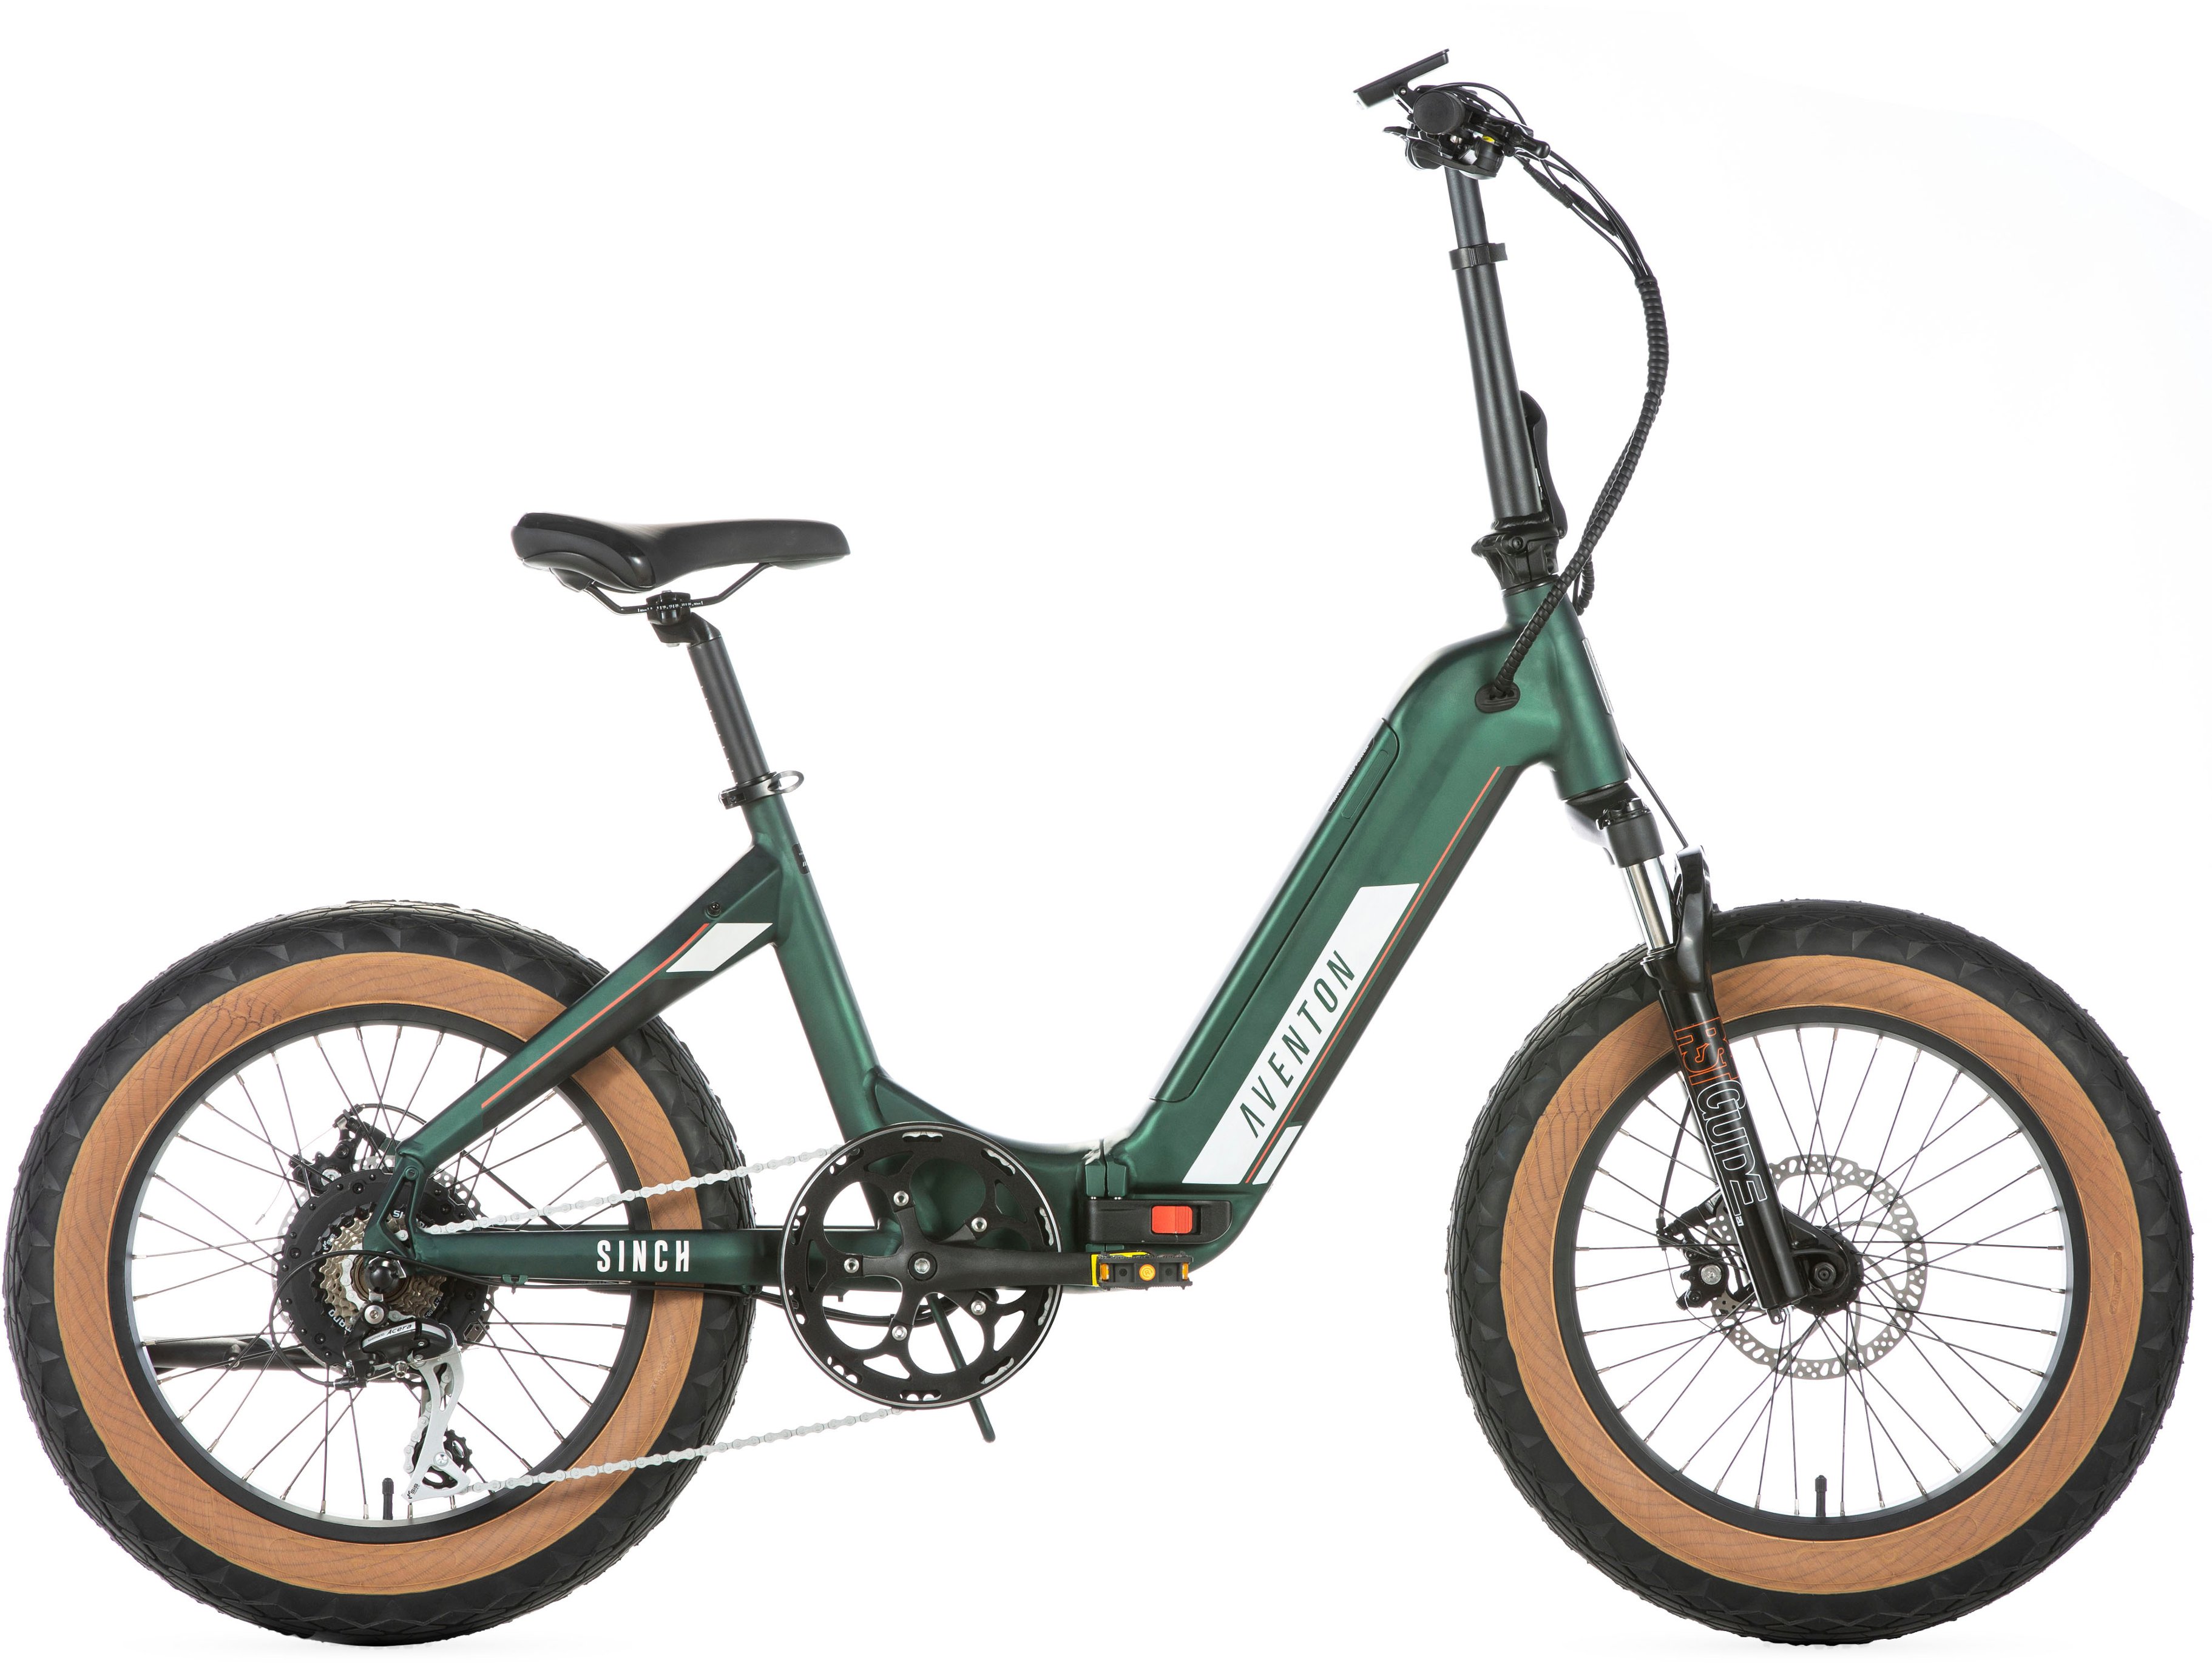 Aventon Sinch Step-Through Foldable Ebike w/ 40 mile Max Operating Range and 20 MPH Max Speed OSFA Moss Green SIS001